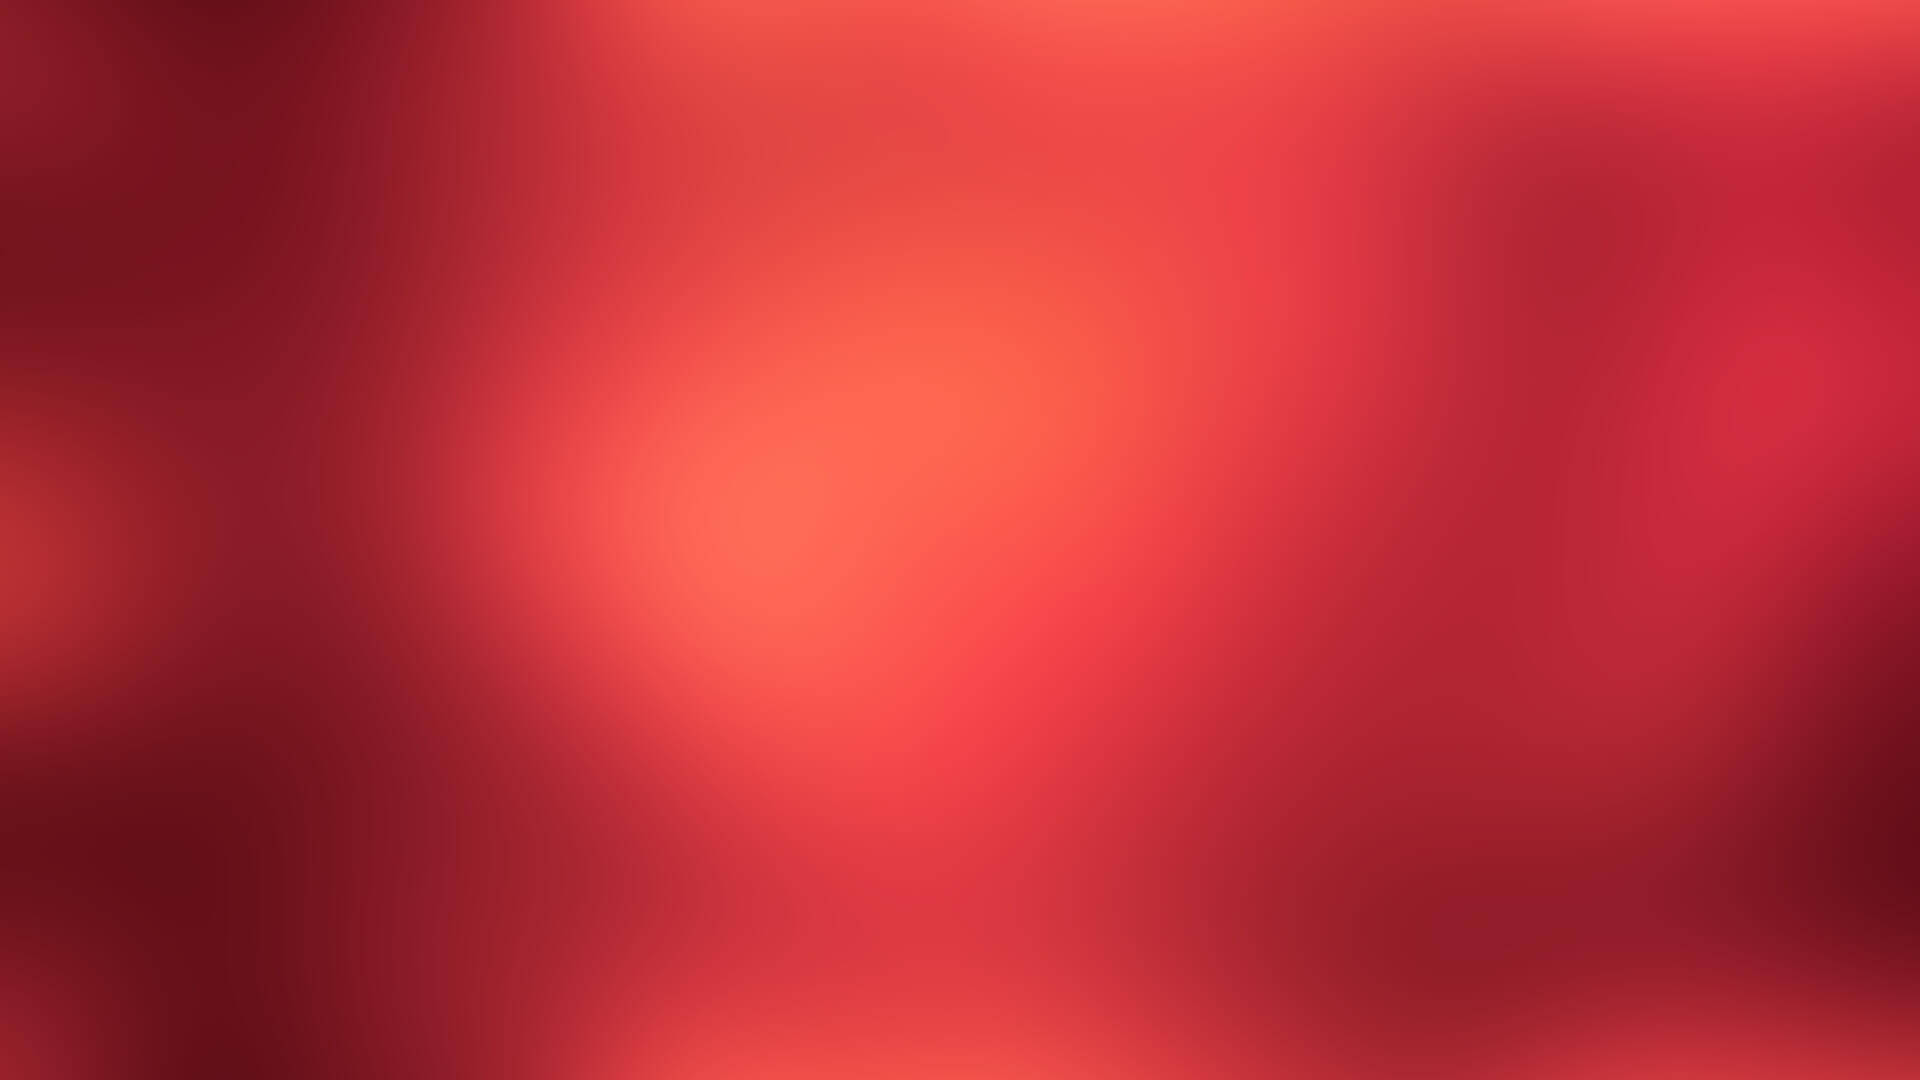 Blurry Red And Plain Background Background